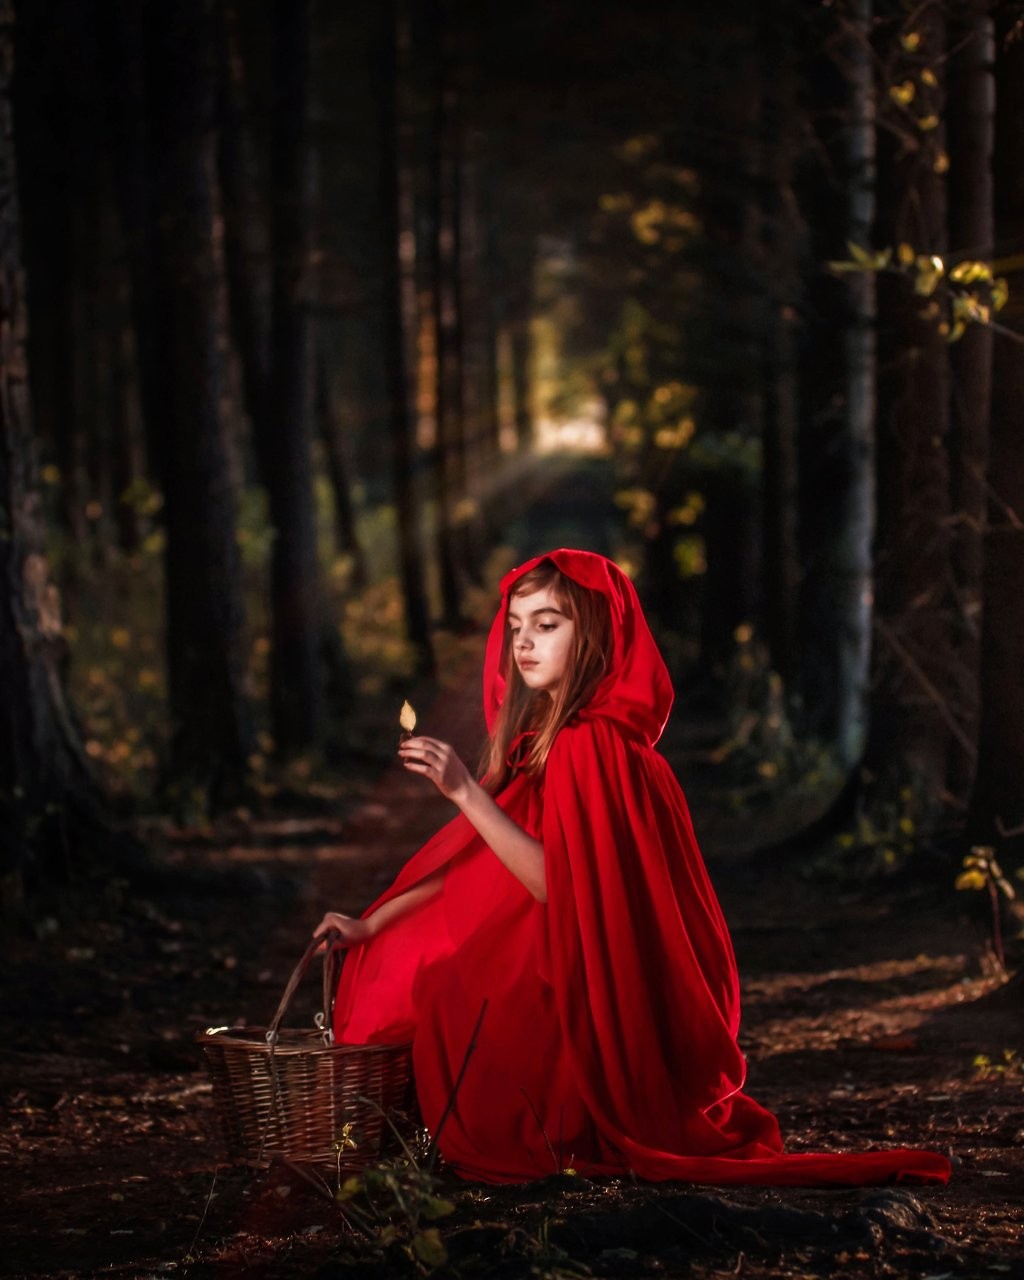 Little Red Riding Hood in the woods, we hope the big bad wolf isn't lurking in the shadows!